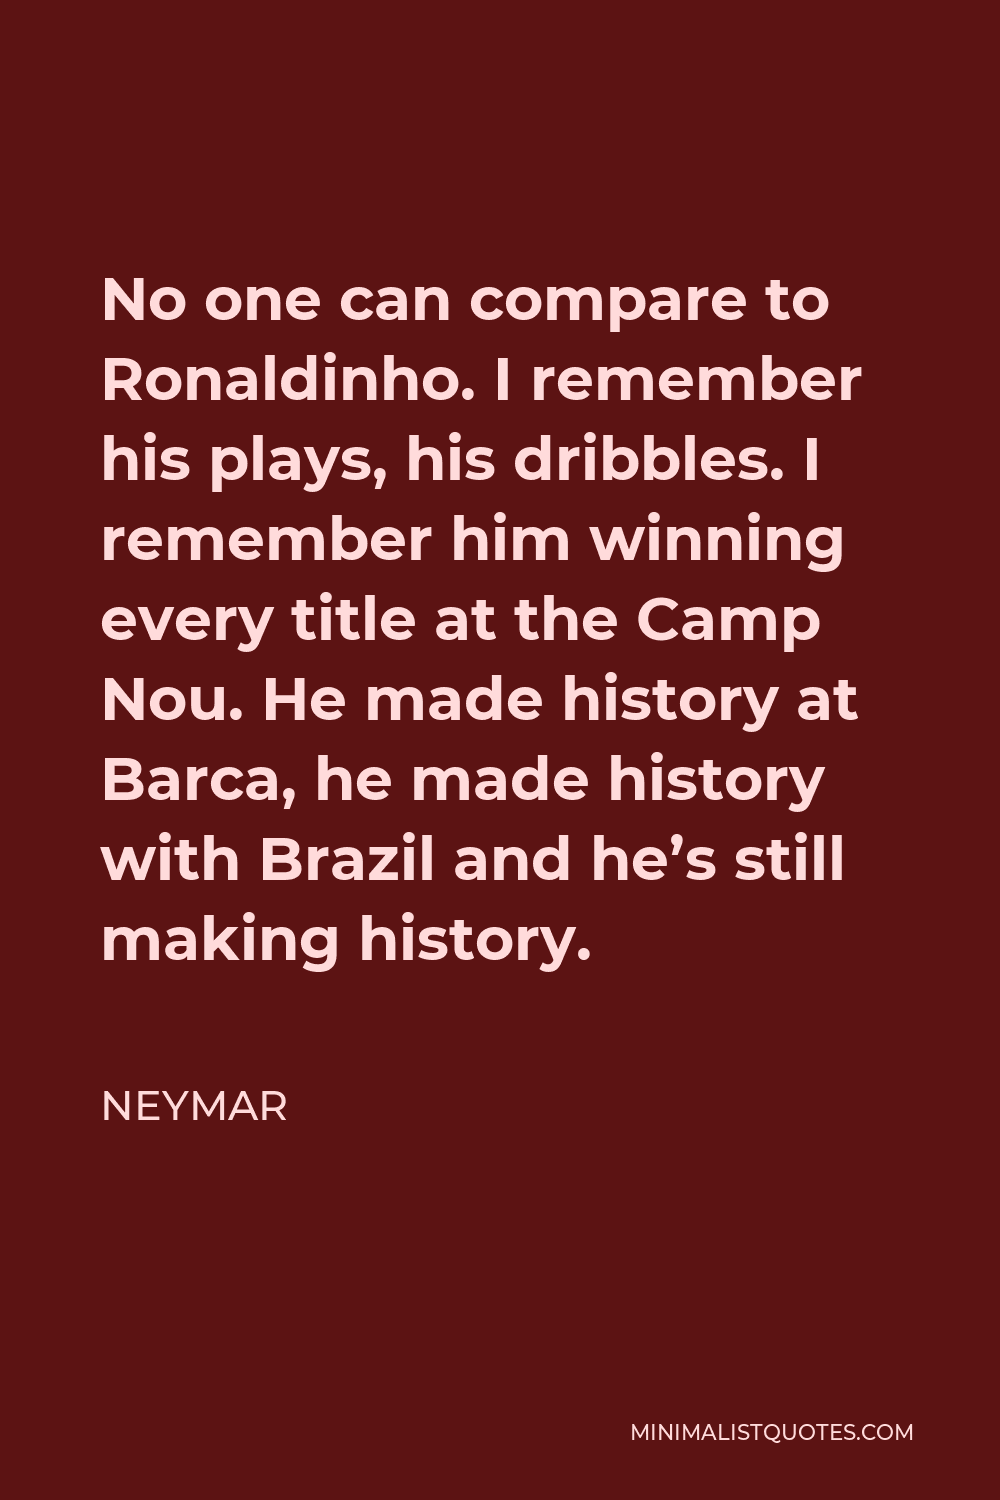 Neymar Quote - No one can compare to Ronaldinho. I remember his plays, his dribbles. I remember him winning every title at the Camp Nou. He made history at Barca, he made history with Brazil and he’s still making history.